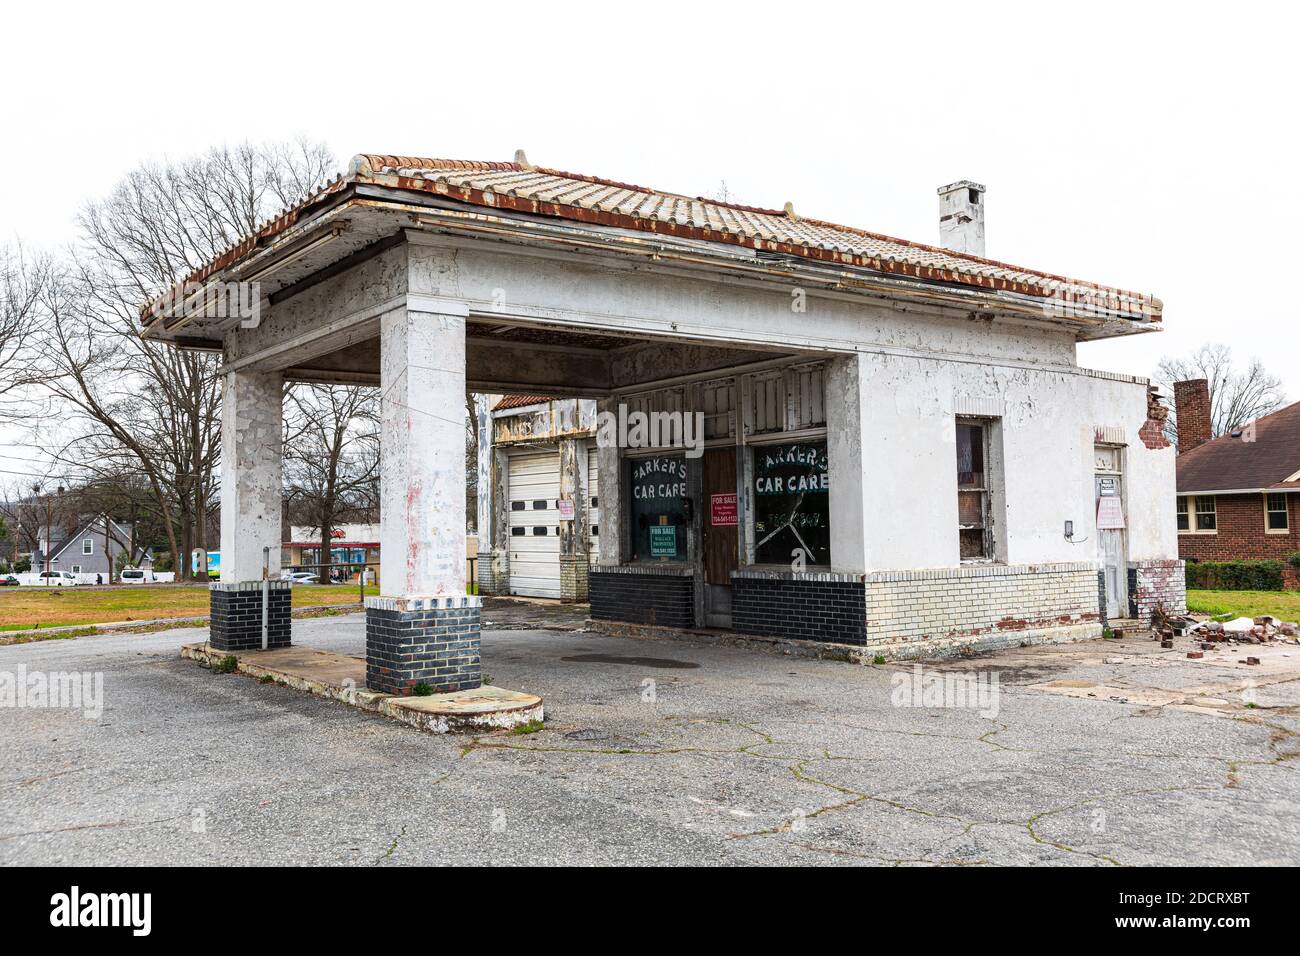 KINGS MTN, NC, USA-4 MARCH 2020: An abandoned old-style gas station building, last called Parker's Car Care, on a main street, with a for sale sign in Stock Photo